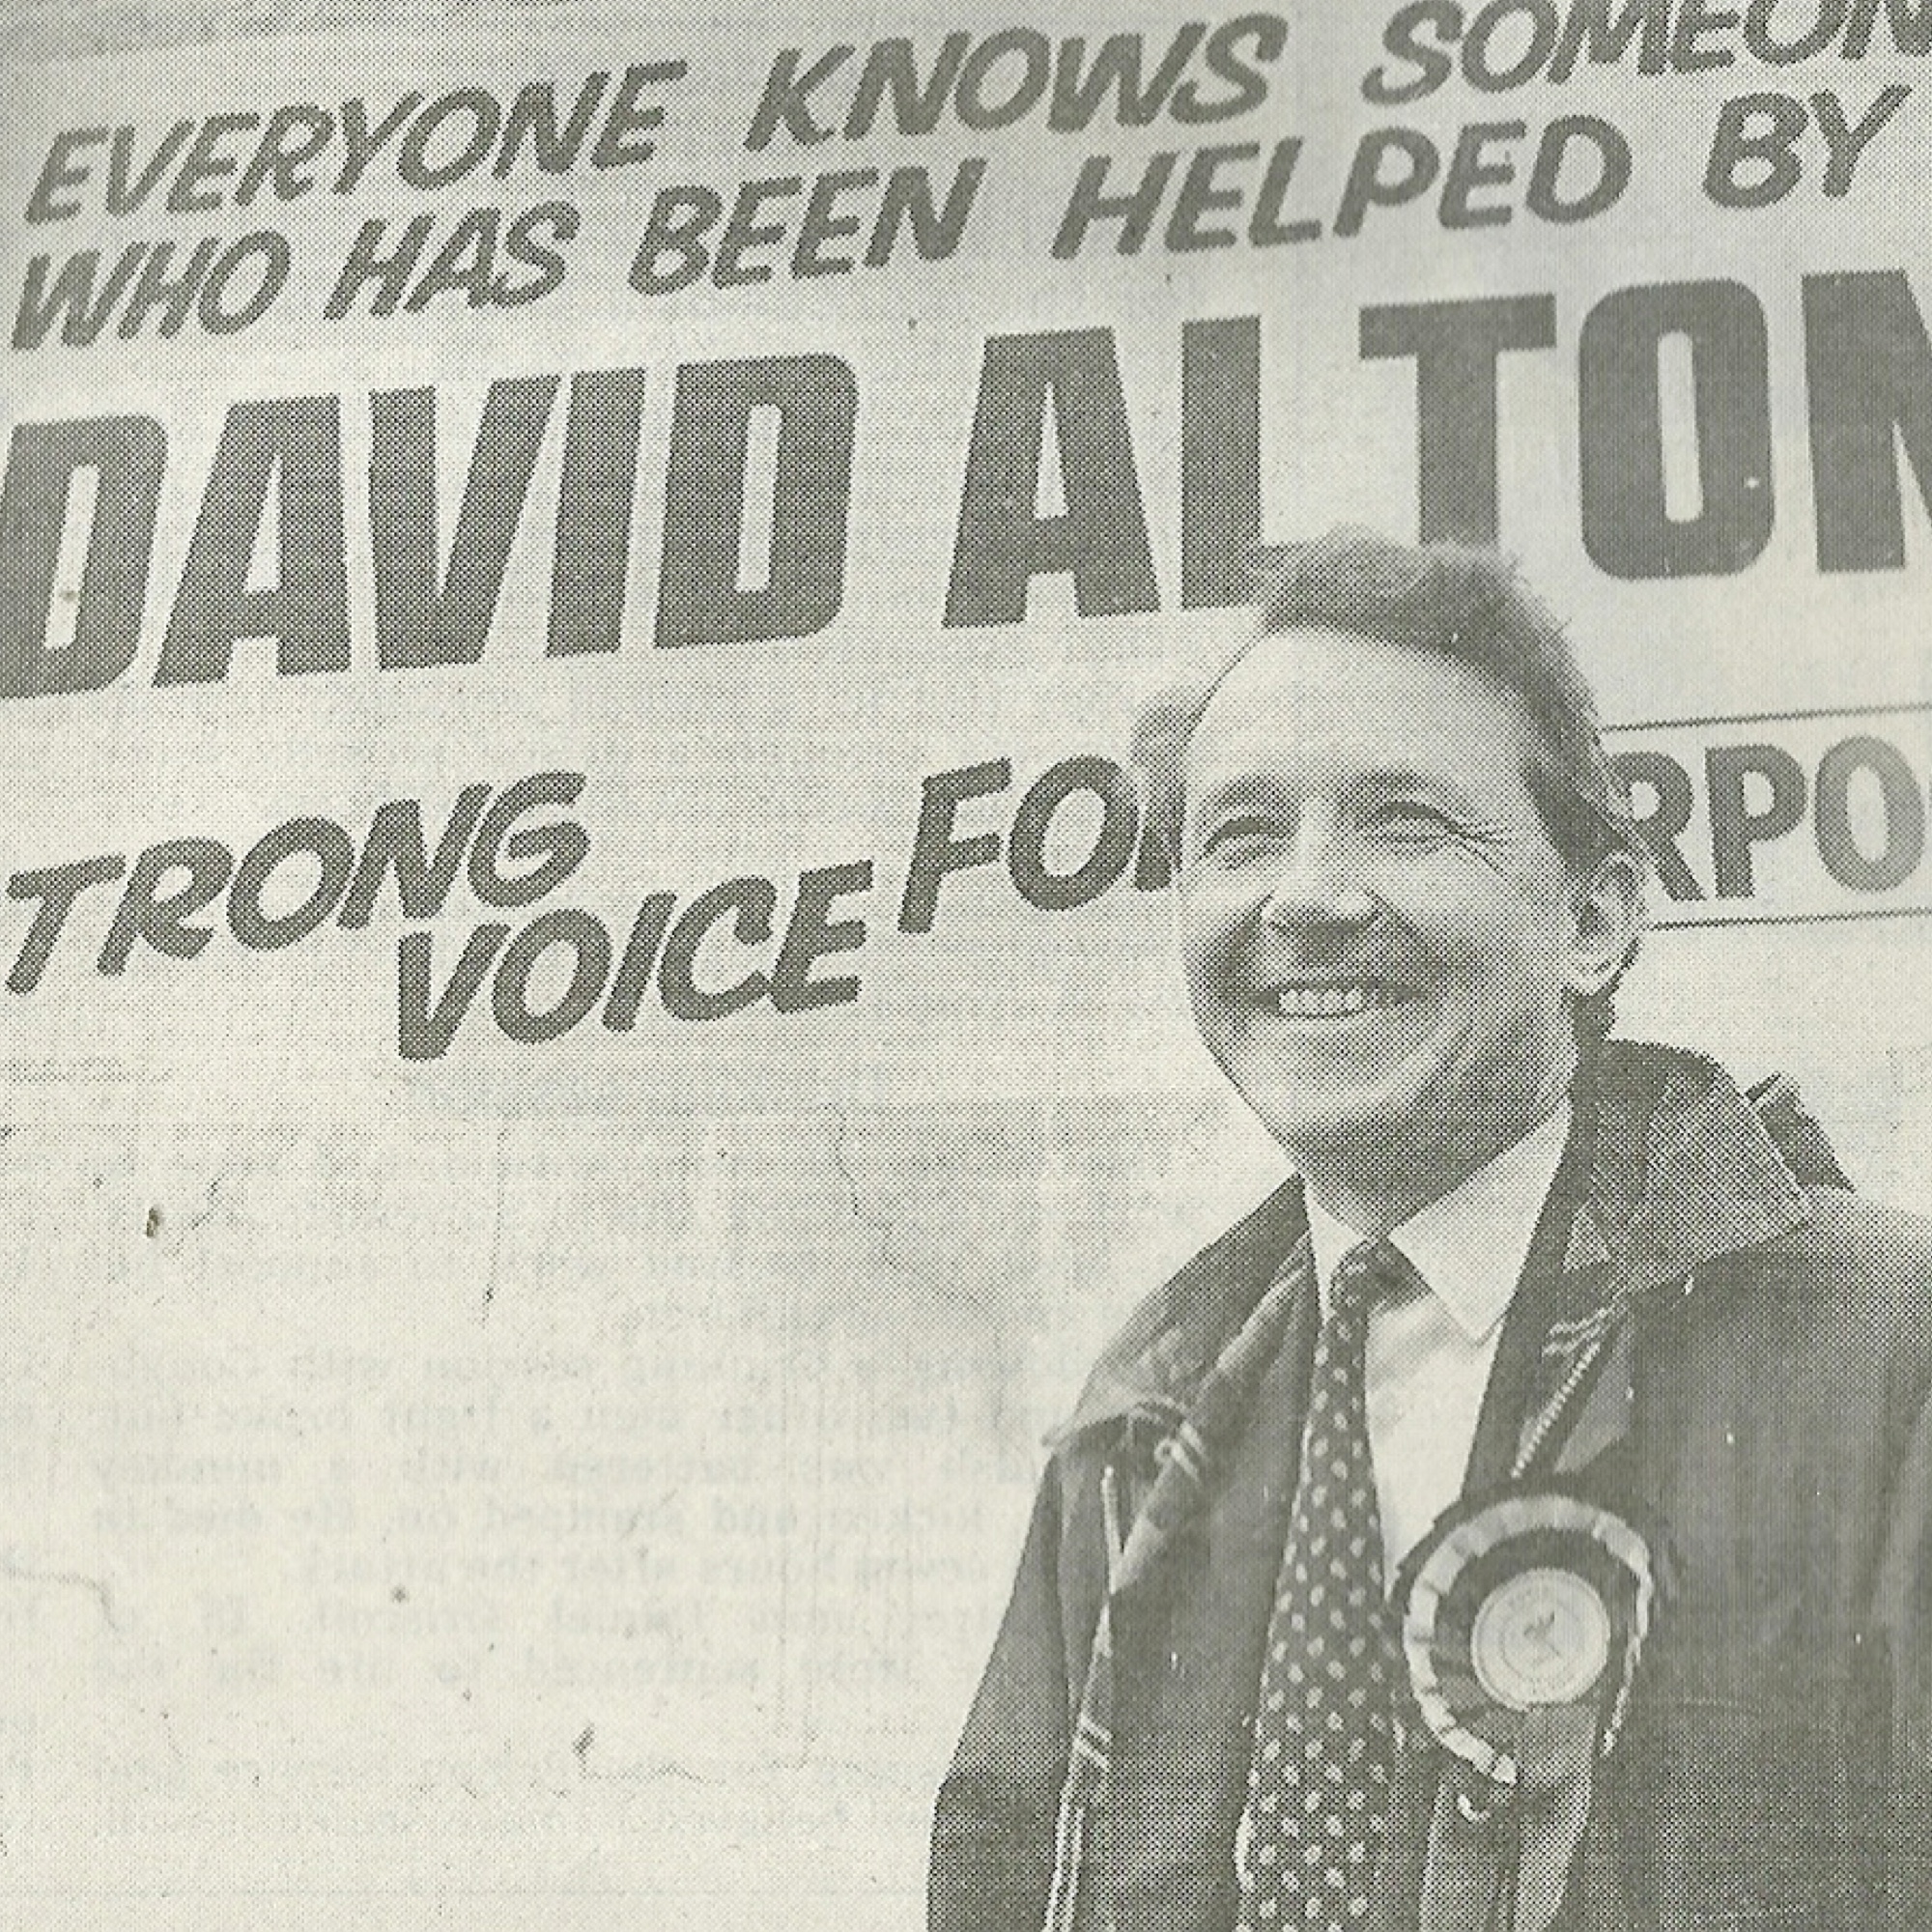 Everyone knows someone who has been helped by David Alton